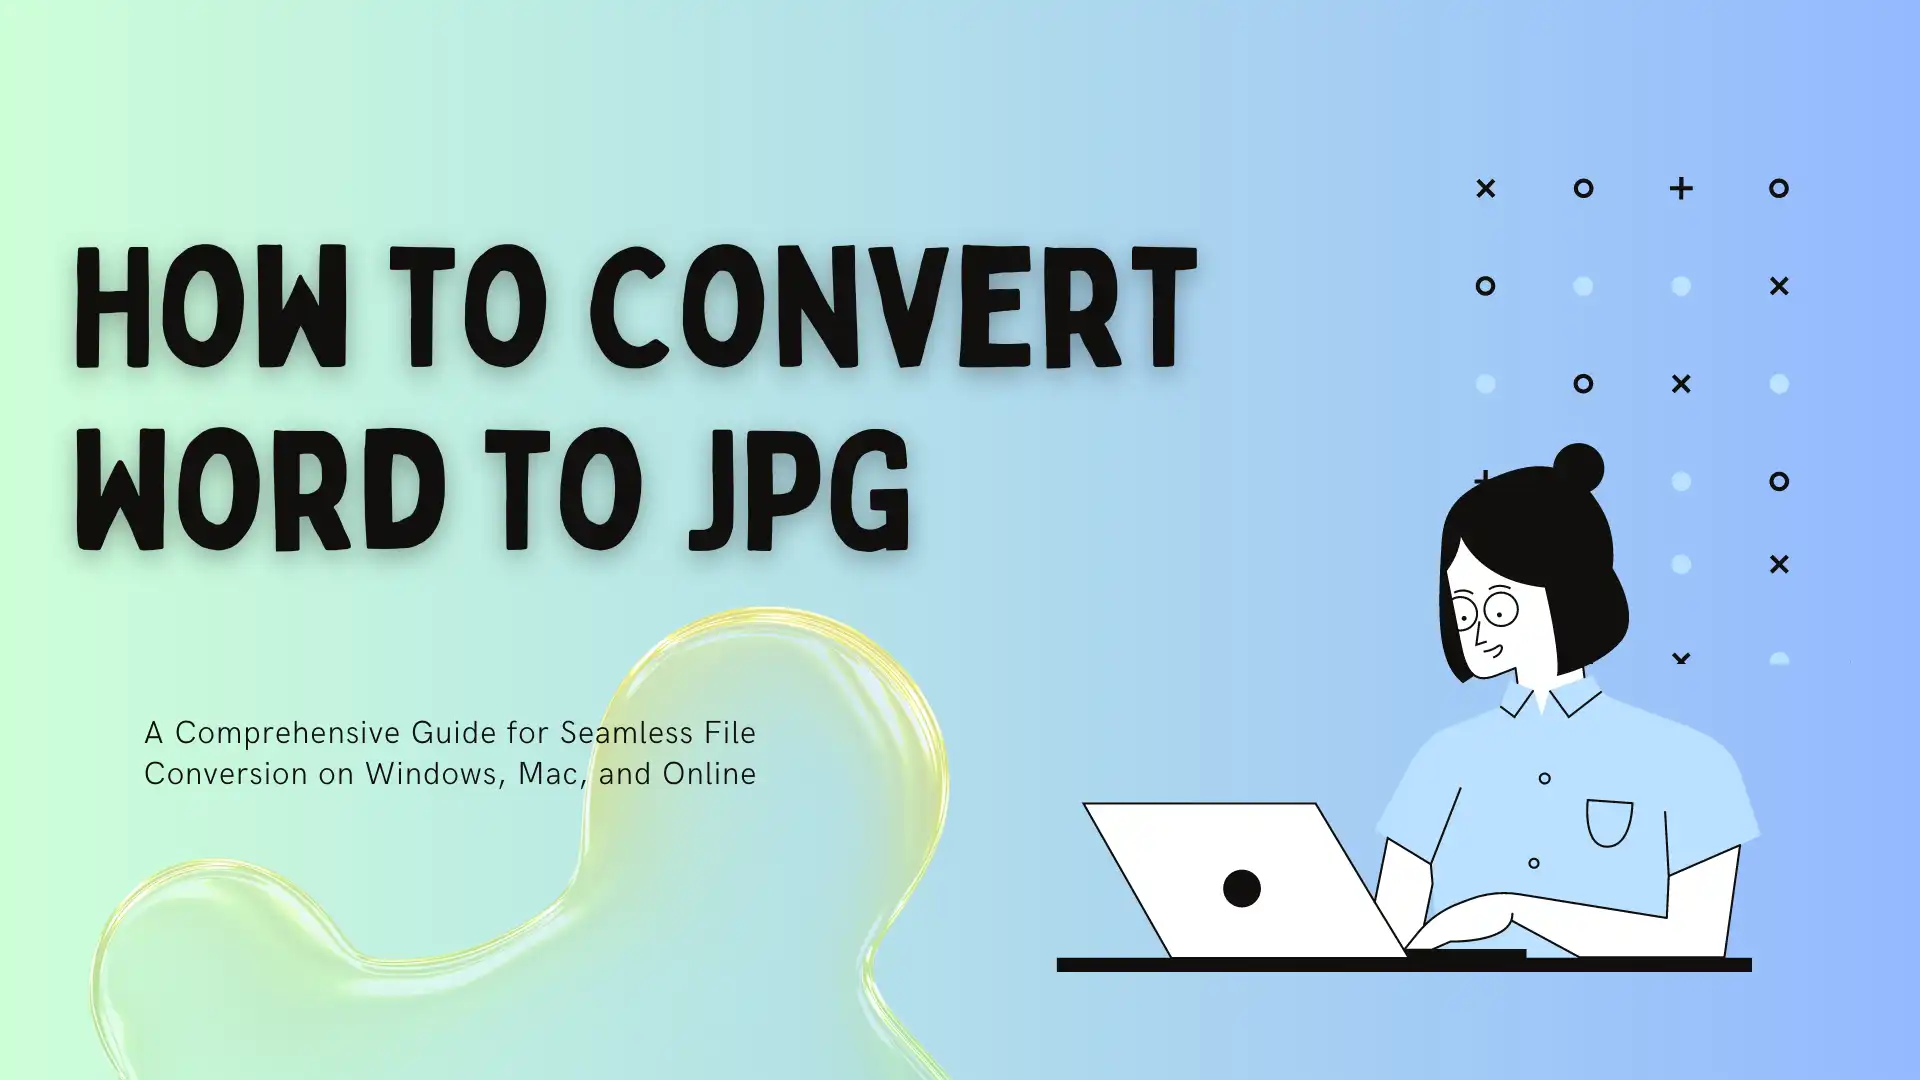 How to Convert Word to JPG: Seamless File Conversion Guide